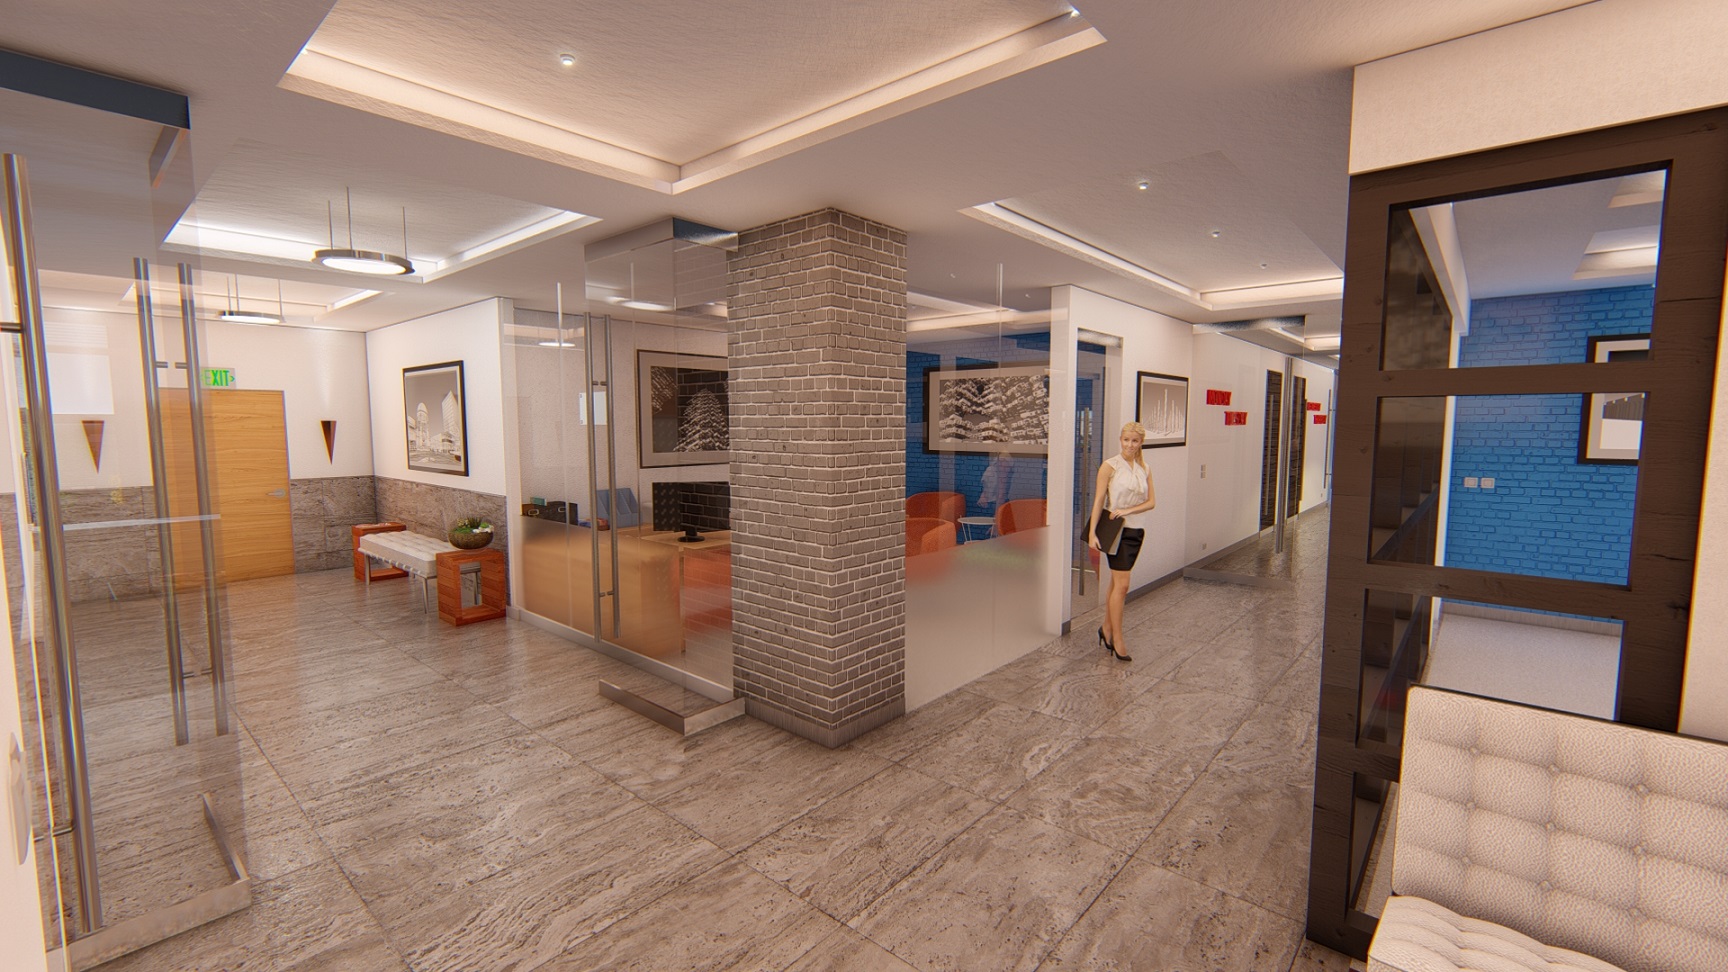 LINQ3 OFFICES - LOBBY